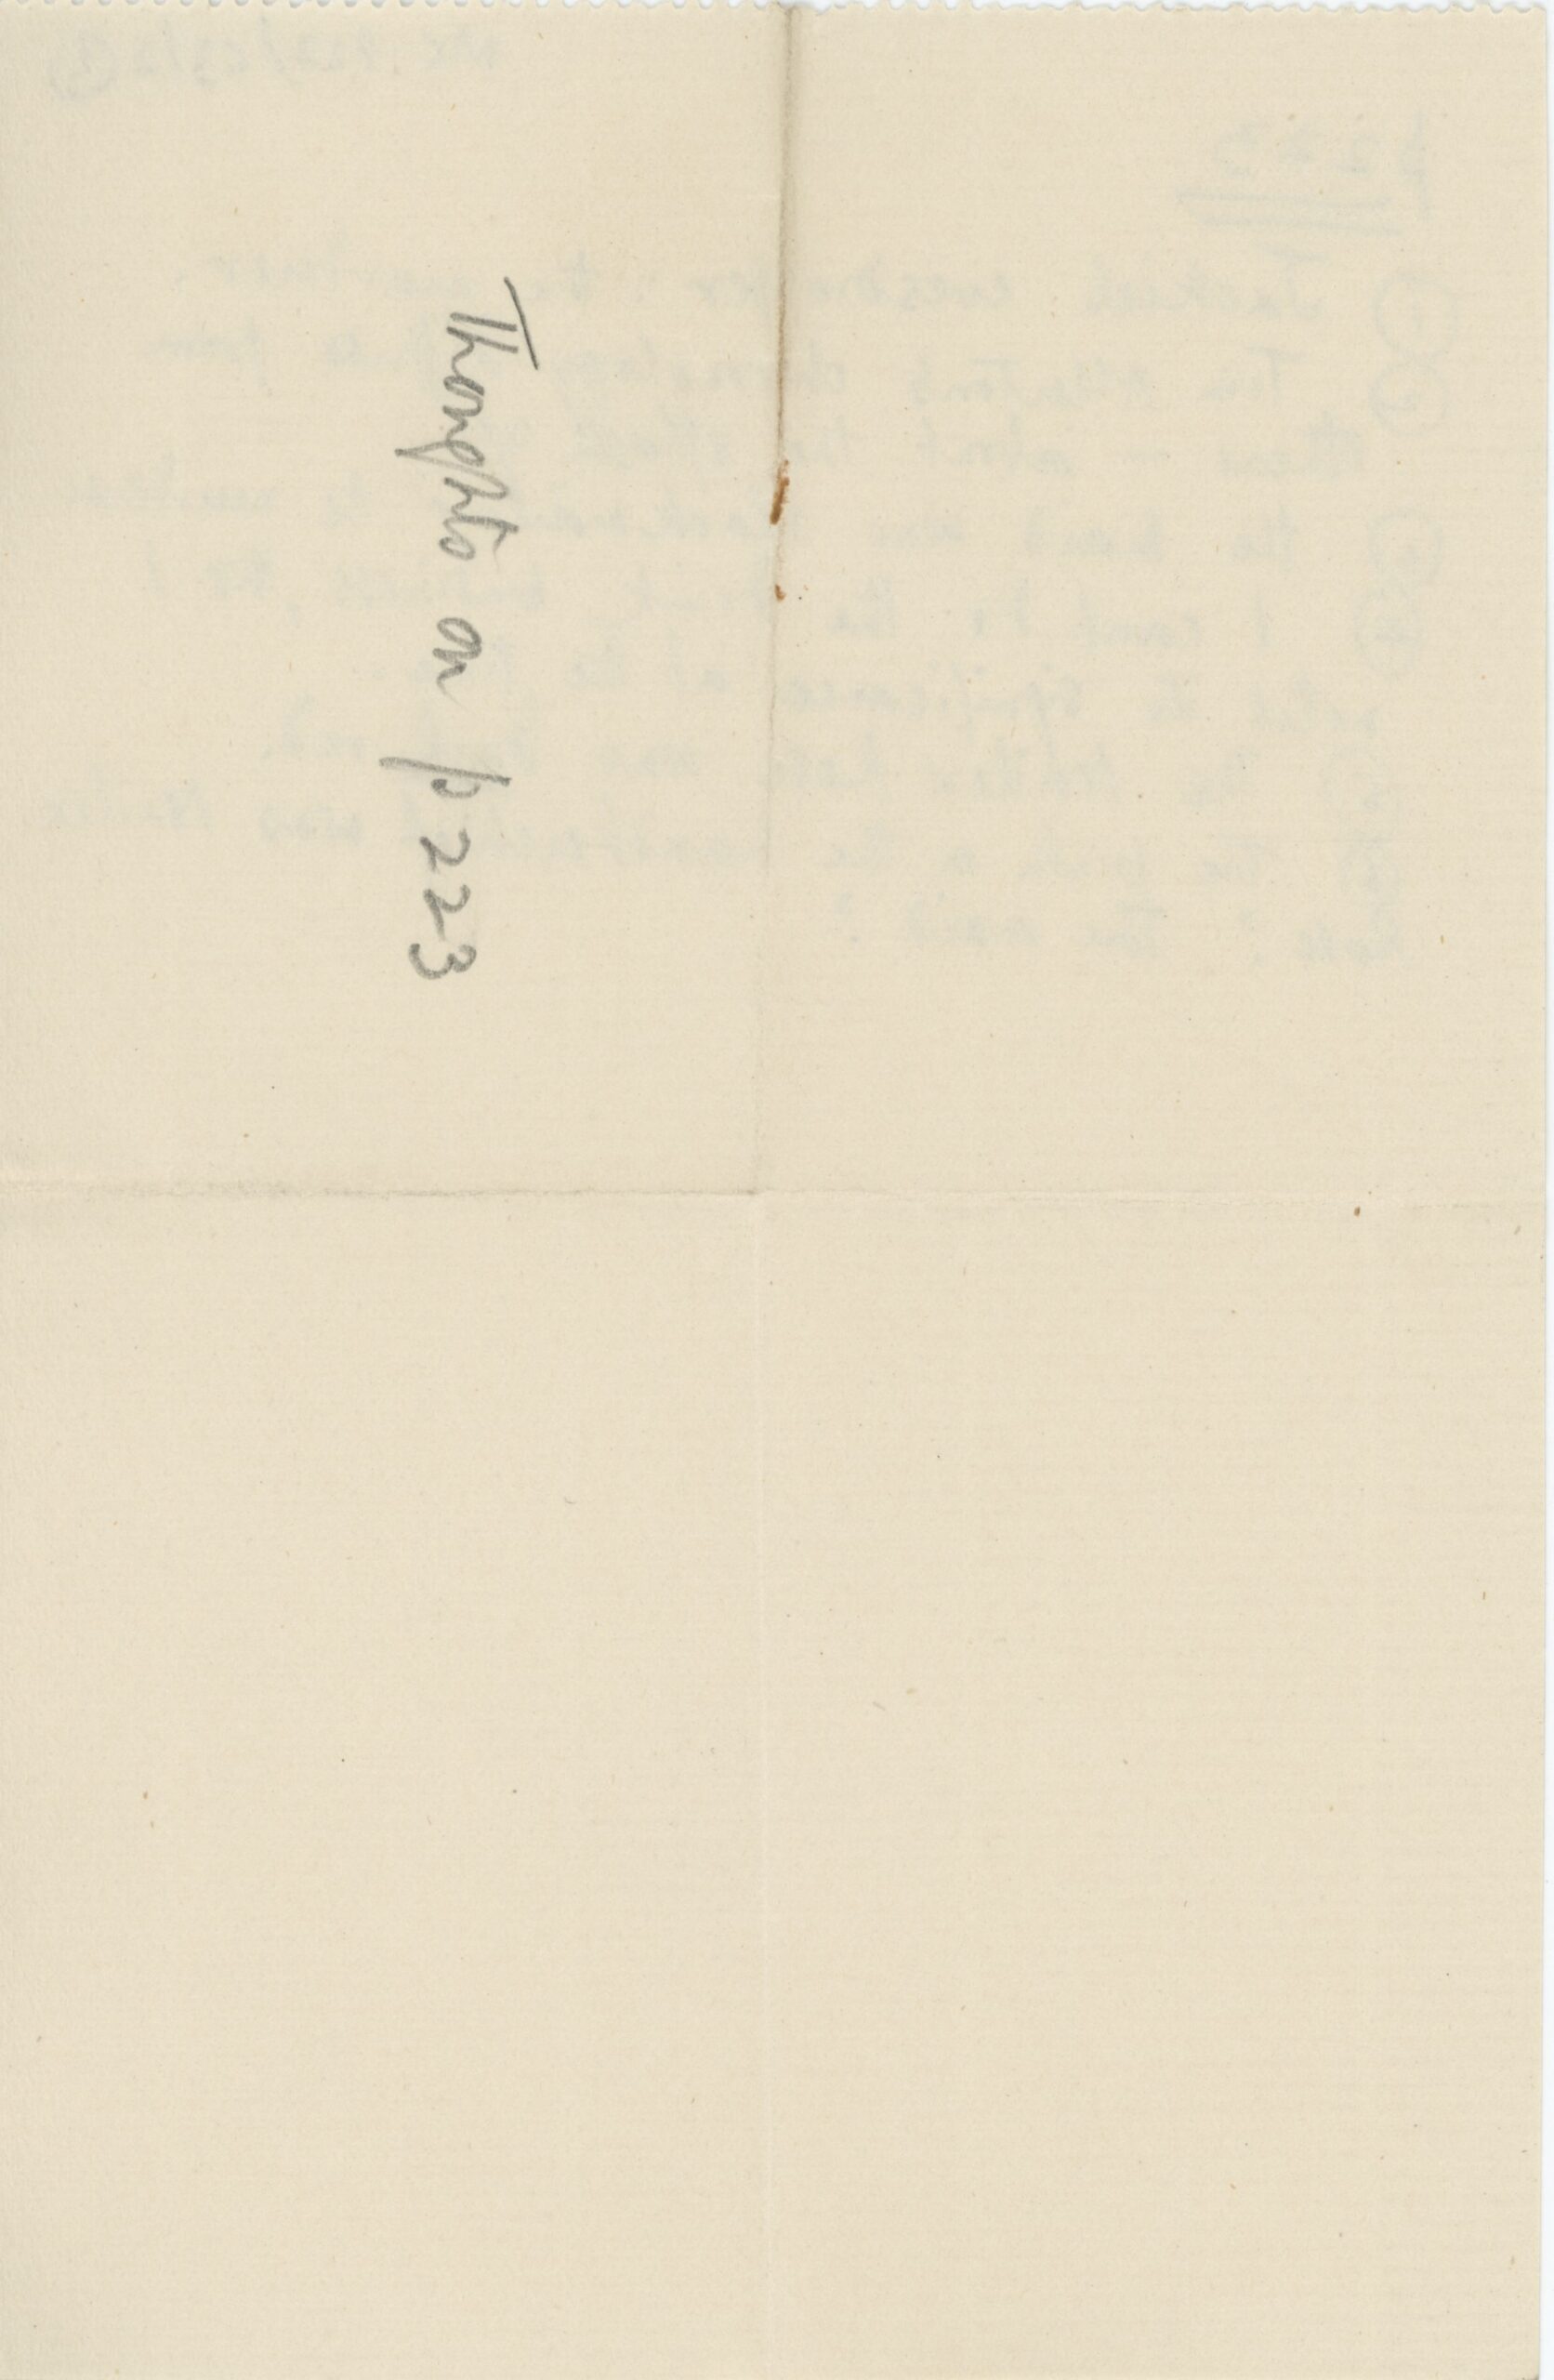 Small sheet of paper with handwritten notes in pencil. The text reads: Thoughts of p223